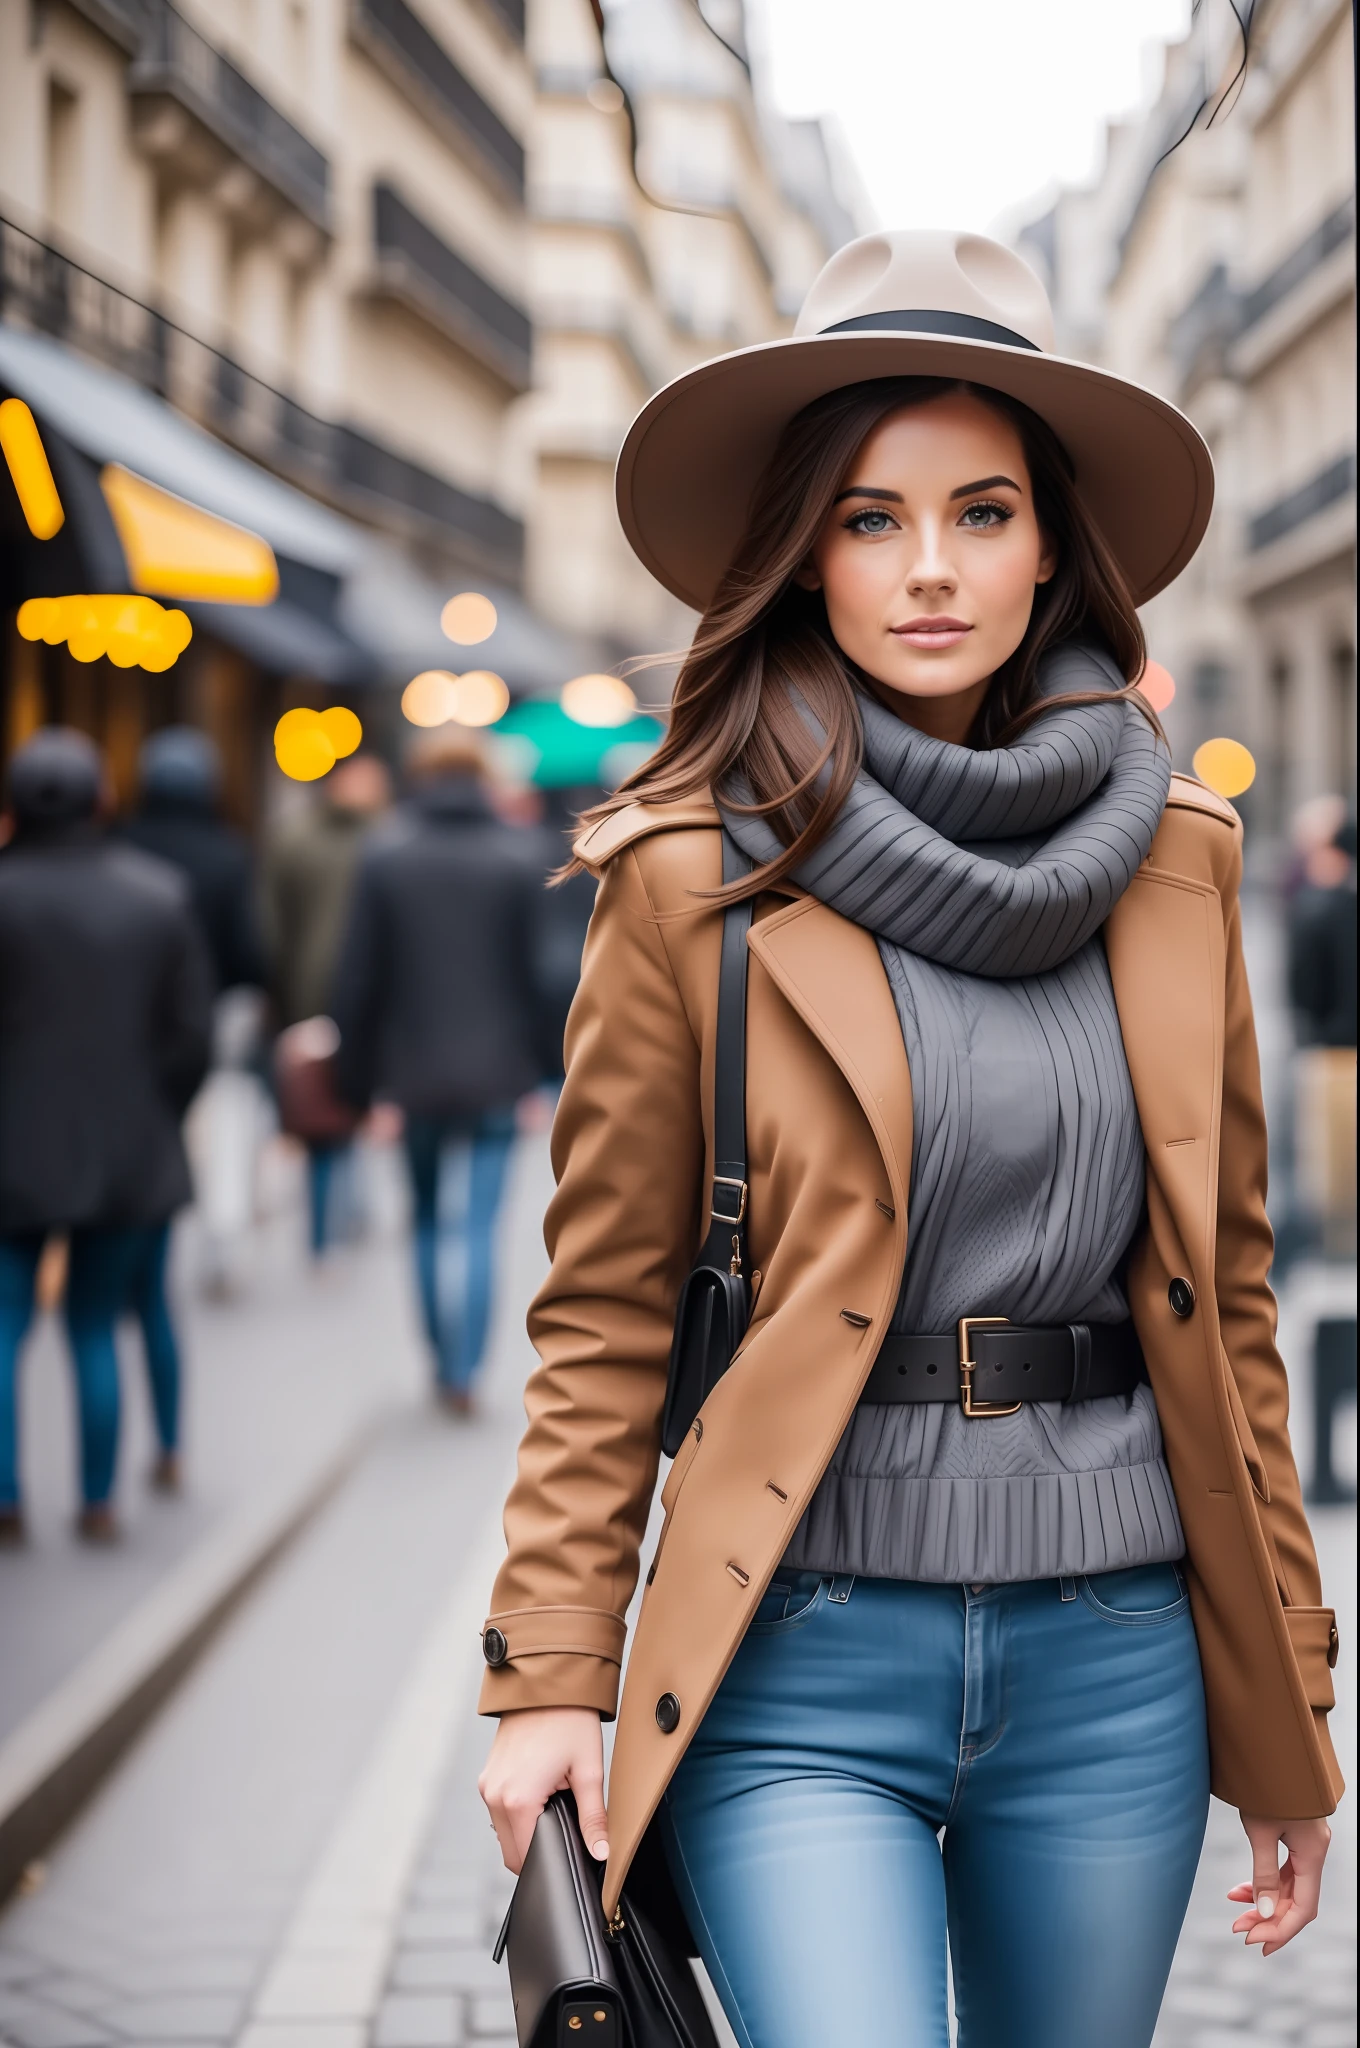 this woman , stylish look, cold day, Full Body, woman with Brown Hair and Brown eyes Walk in the street in high Definition, paris, beautiful woman walking down street and looking at camera, 8k, photos taken by hasselblad + incredibly detailed, sharpness, details + professional lighting, photographic lighting + 50mm, 80mm, 100m + lightroom gallery + behance photography + unsplash --ar 2:3 --auto --s2